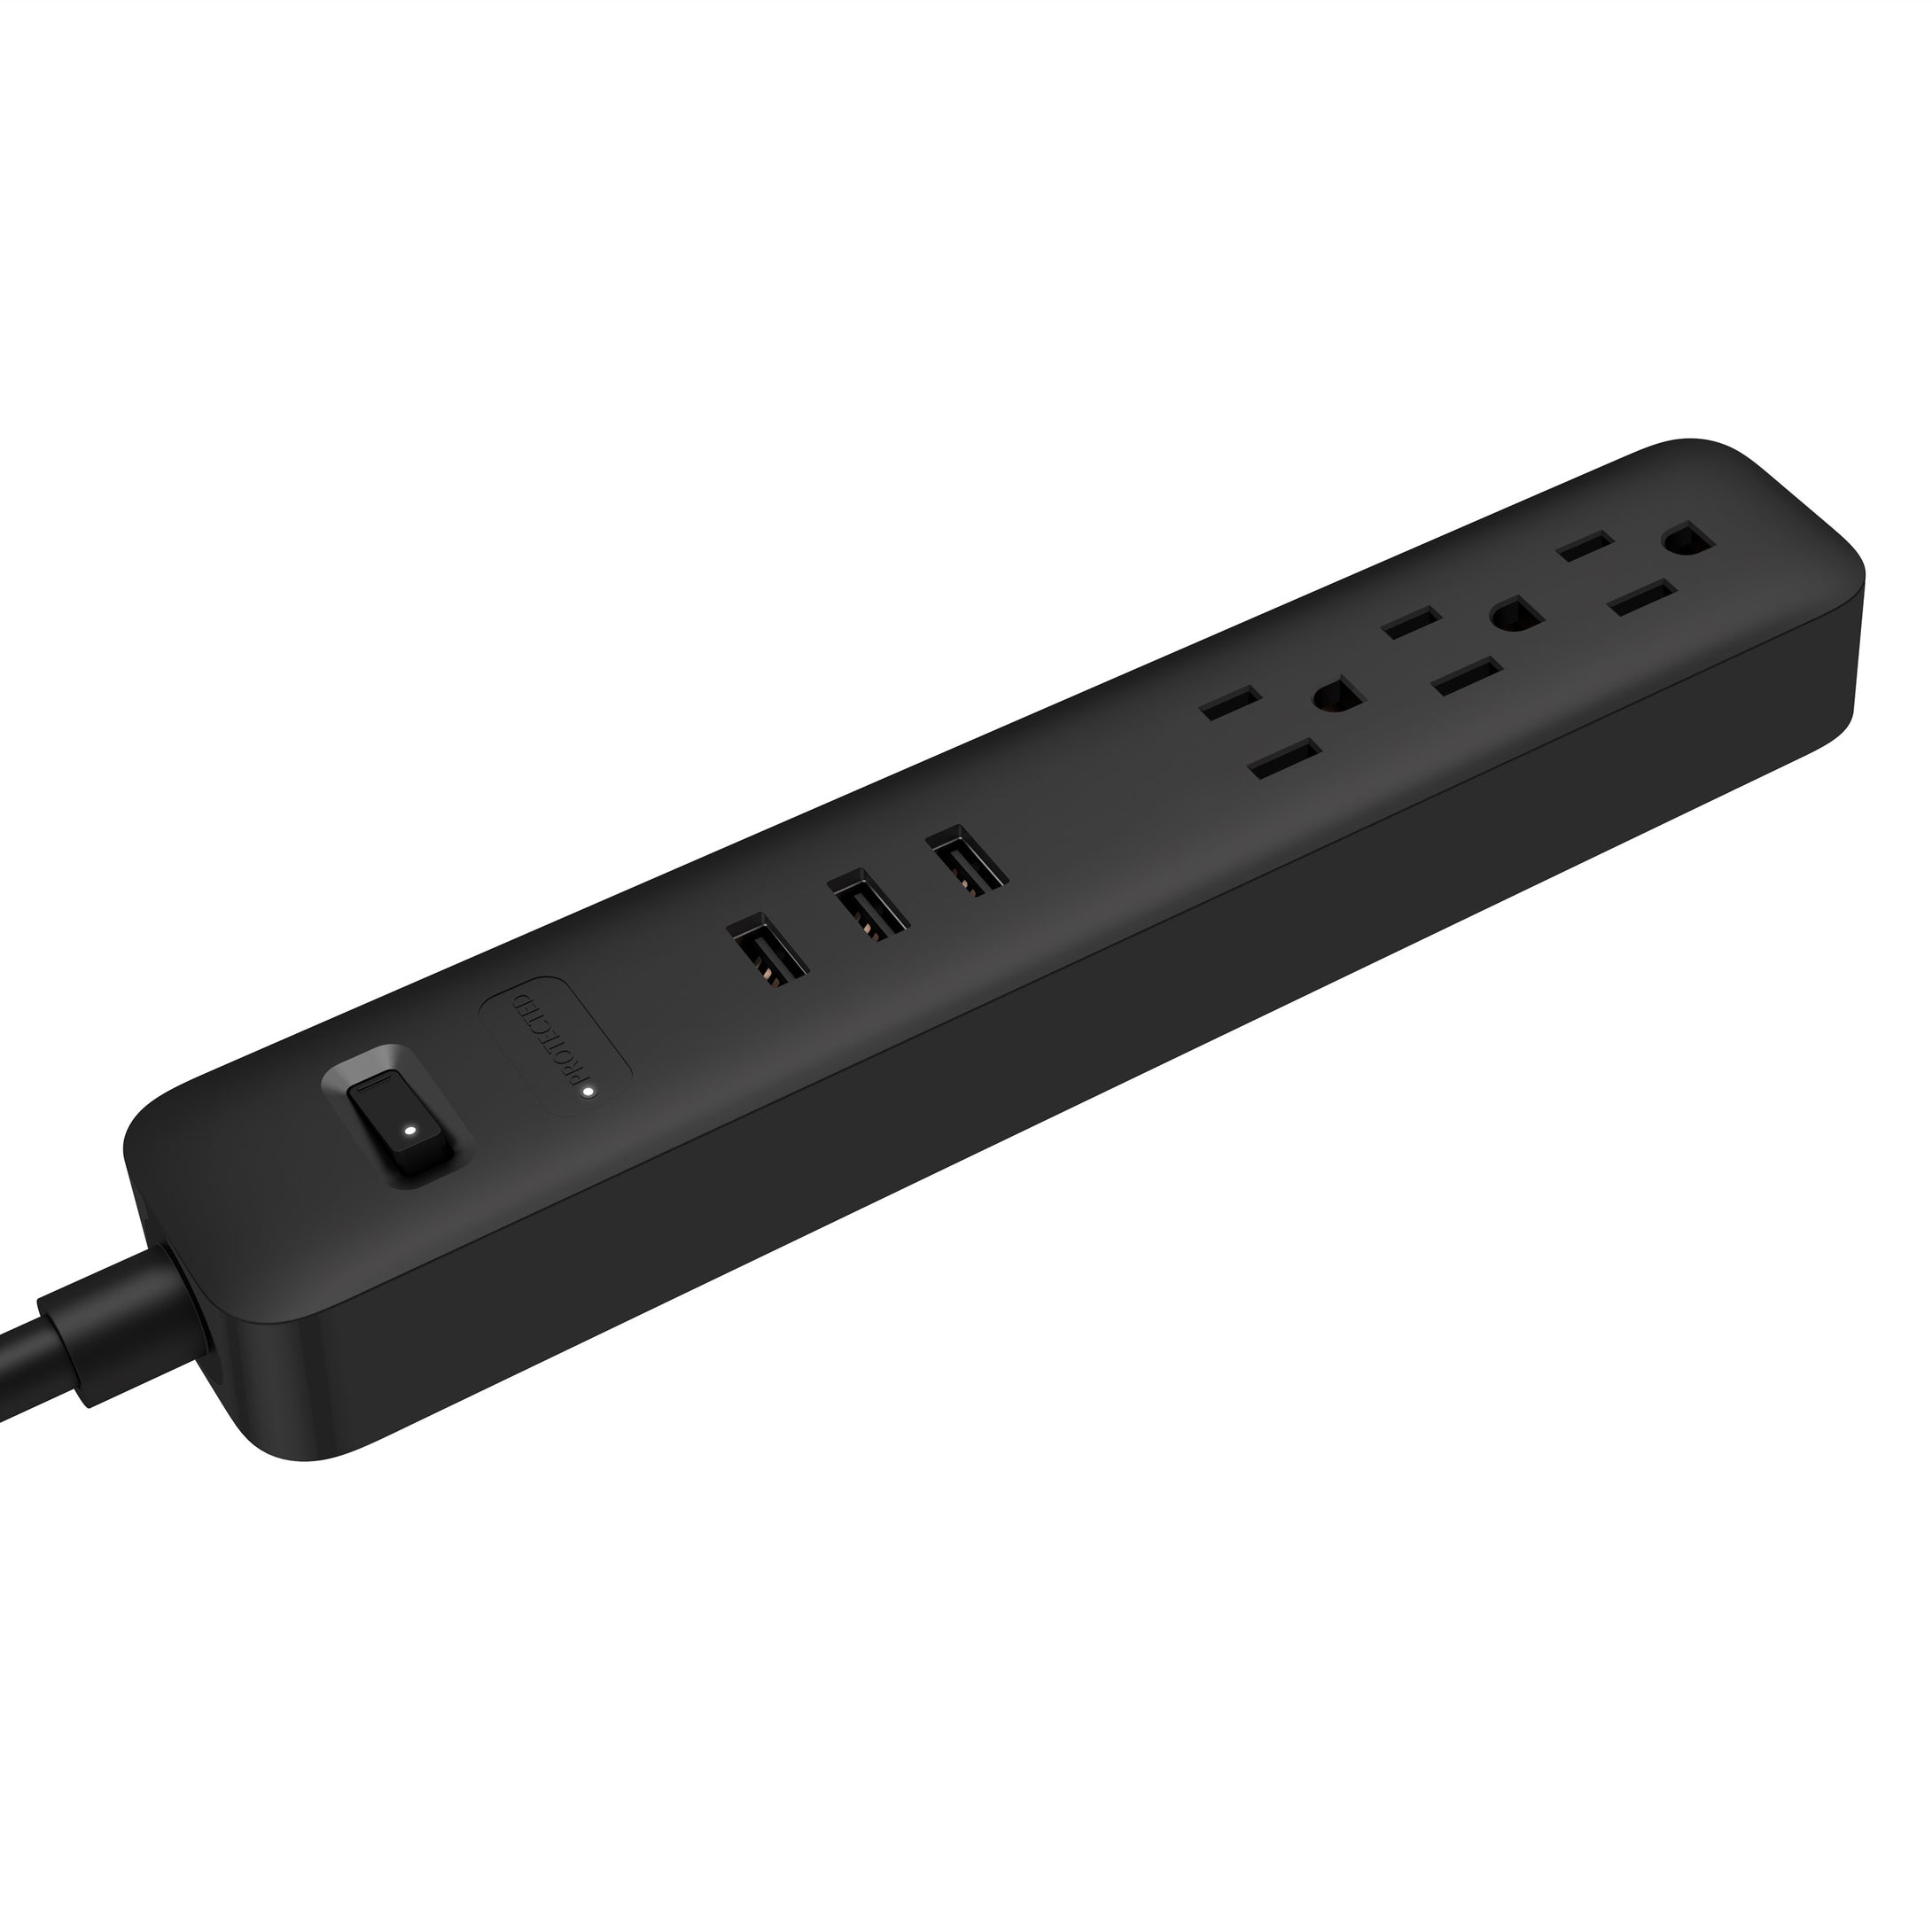 TP Quality 3 Outlet 3 USB Ports Switch Power Strip Surge Protector